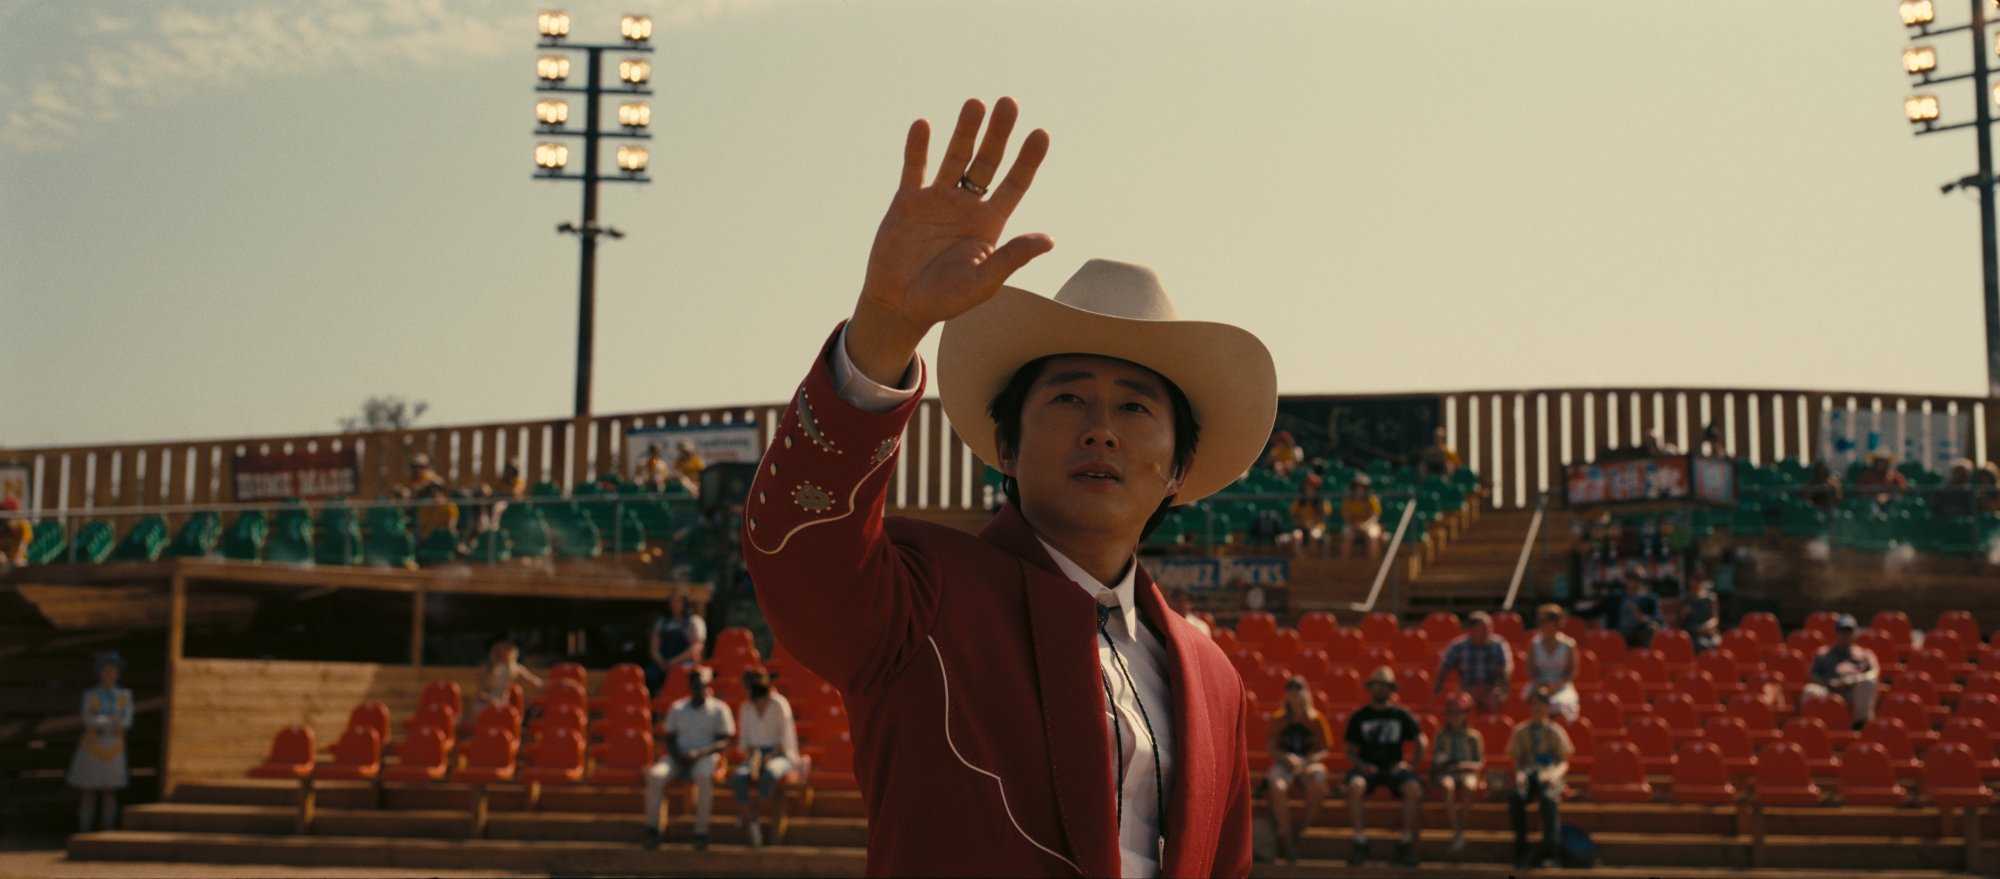 'Nope' Steven Yeun as Ricky 'Jupe' Park holding his hand up wearing a red suit jacket and cowboy hat in front of a crowd while holding his hand up